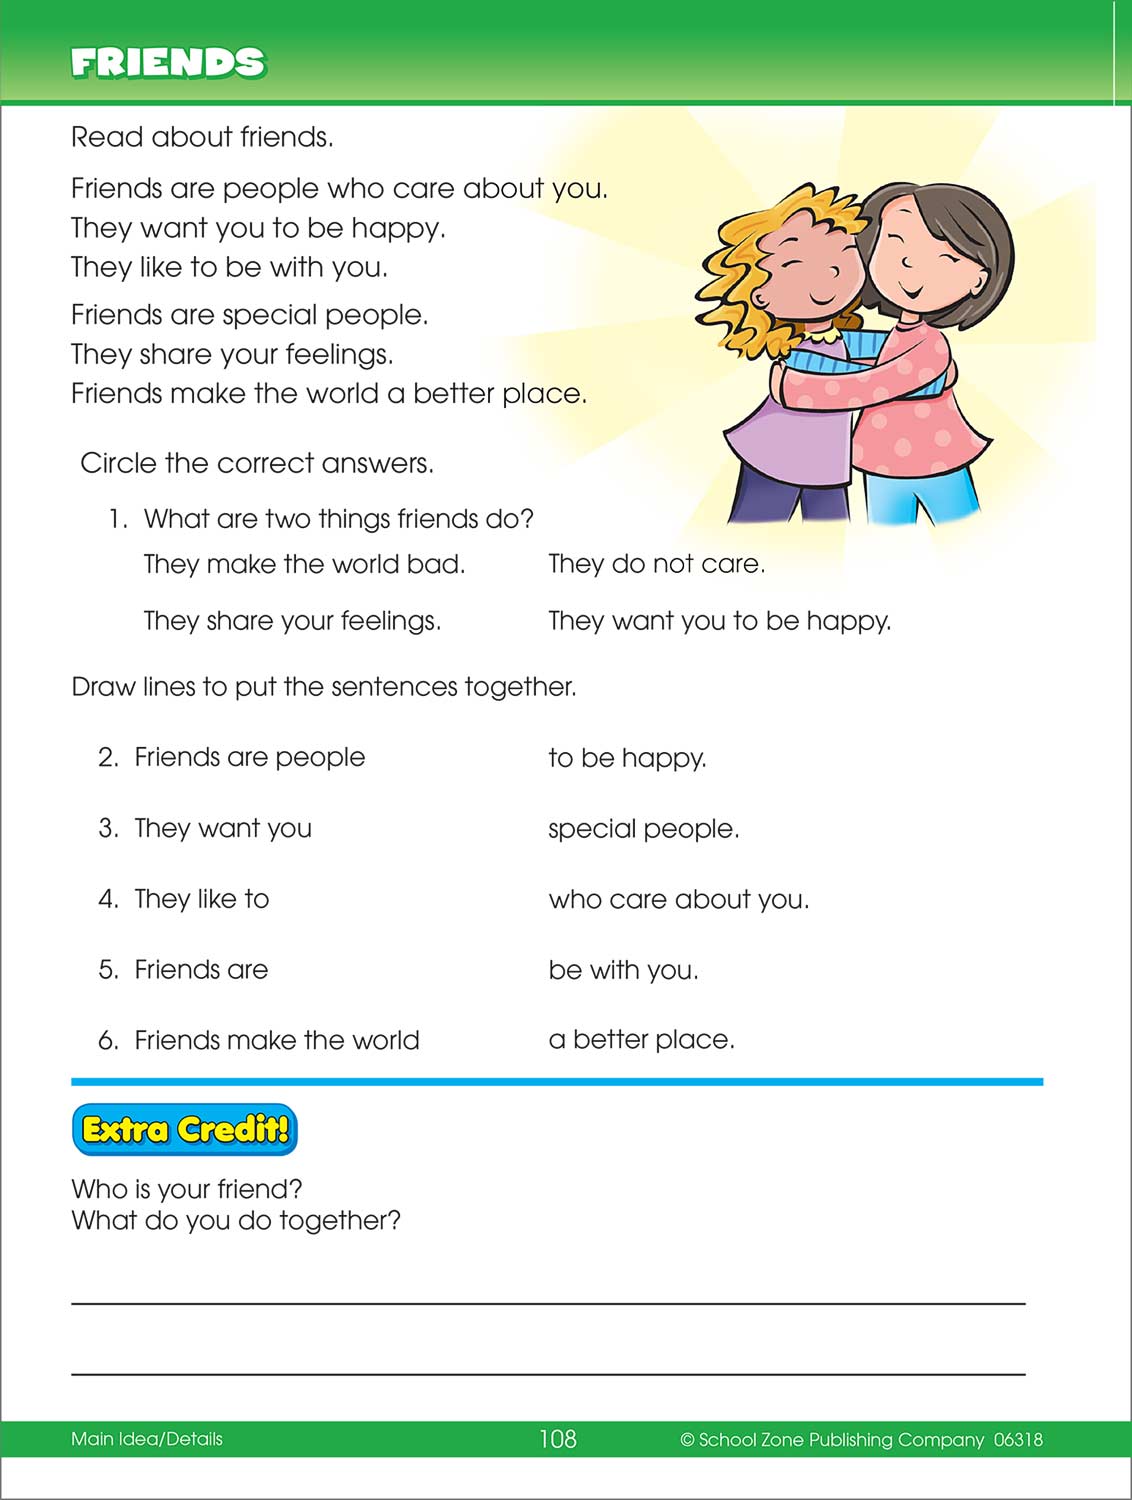 Big Second Grade Workbook - The Toy Chest at the Nutshell